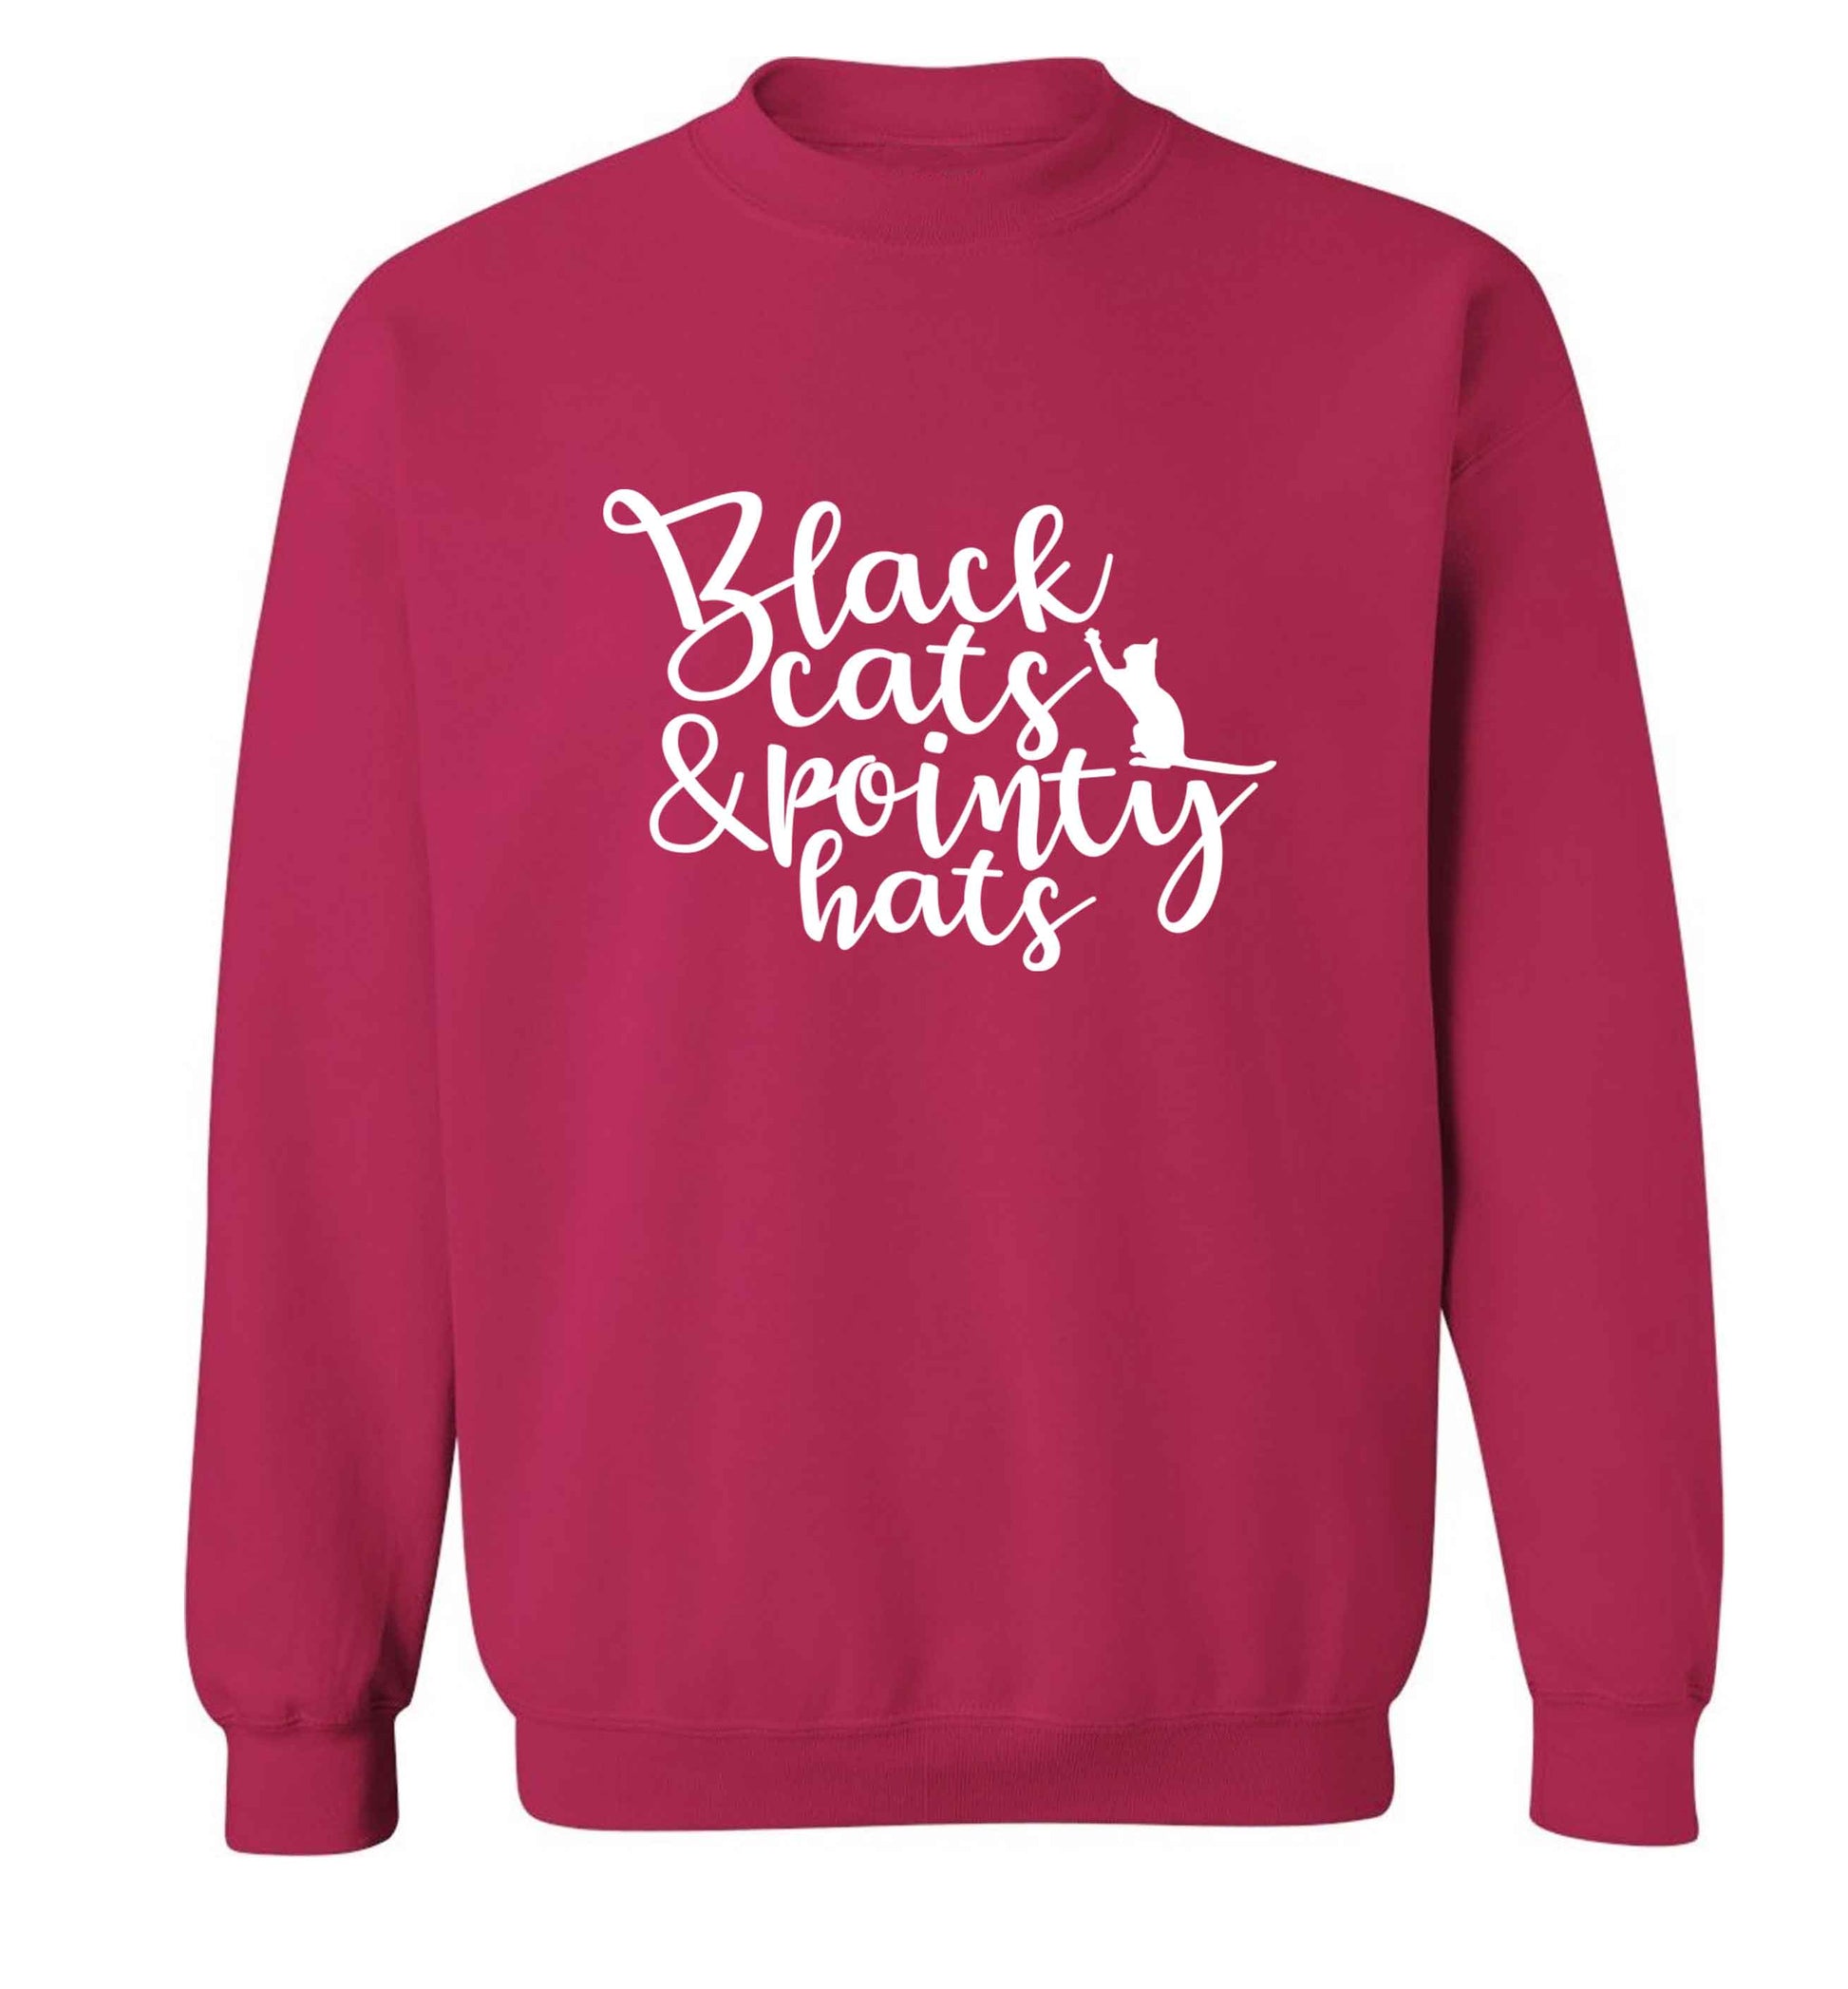 Black cats and pointy hats adult's unisex pink sweater 2XL